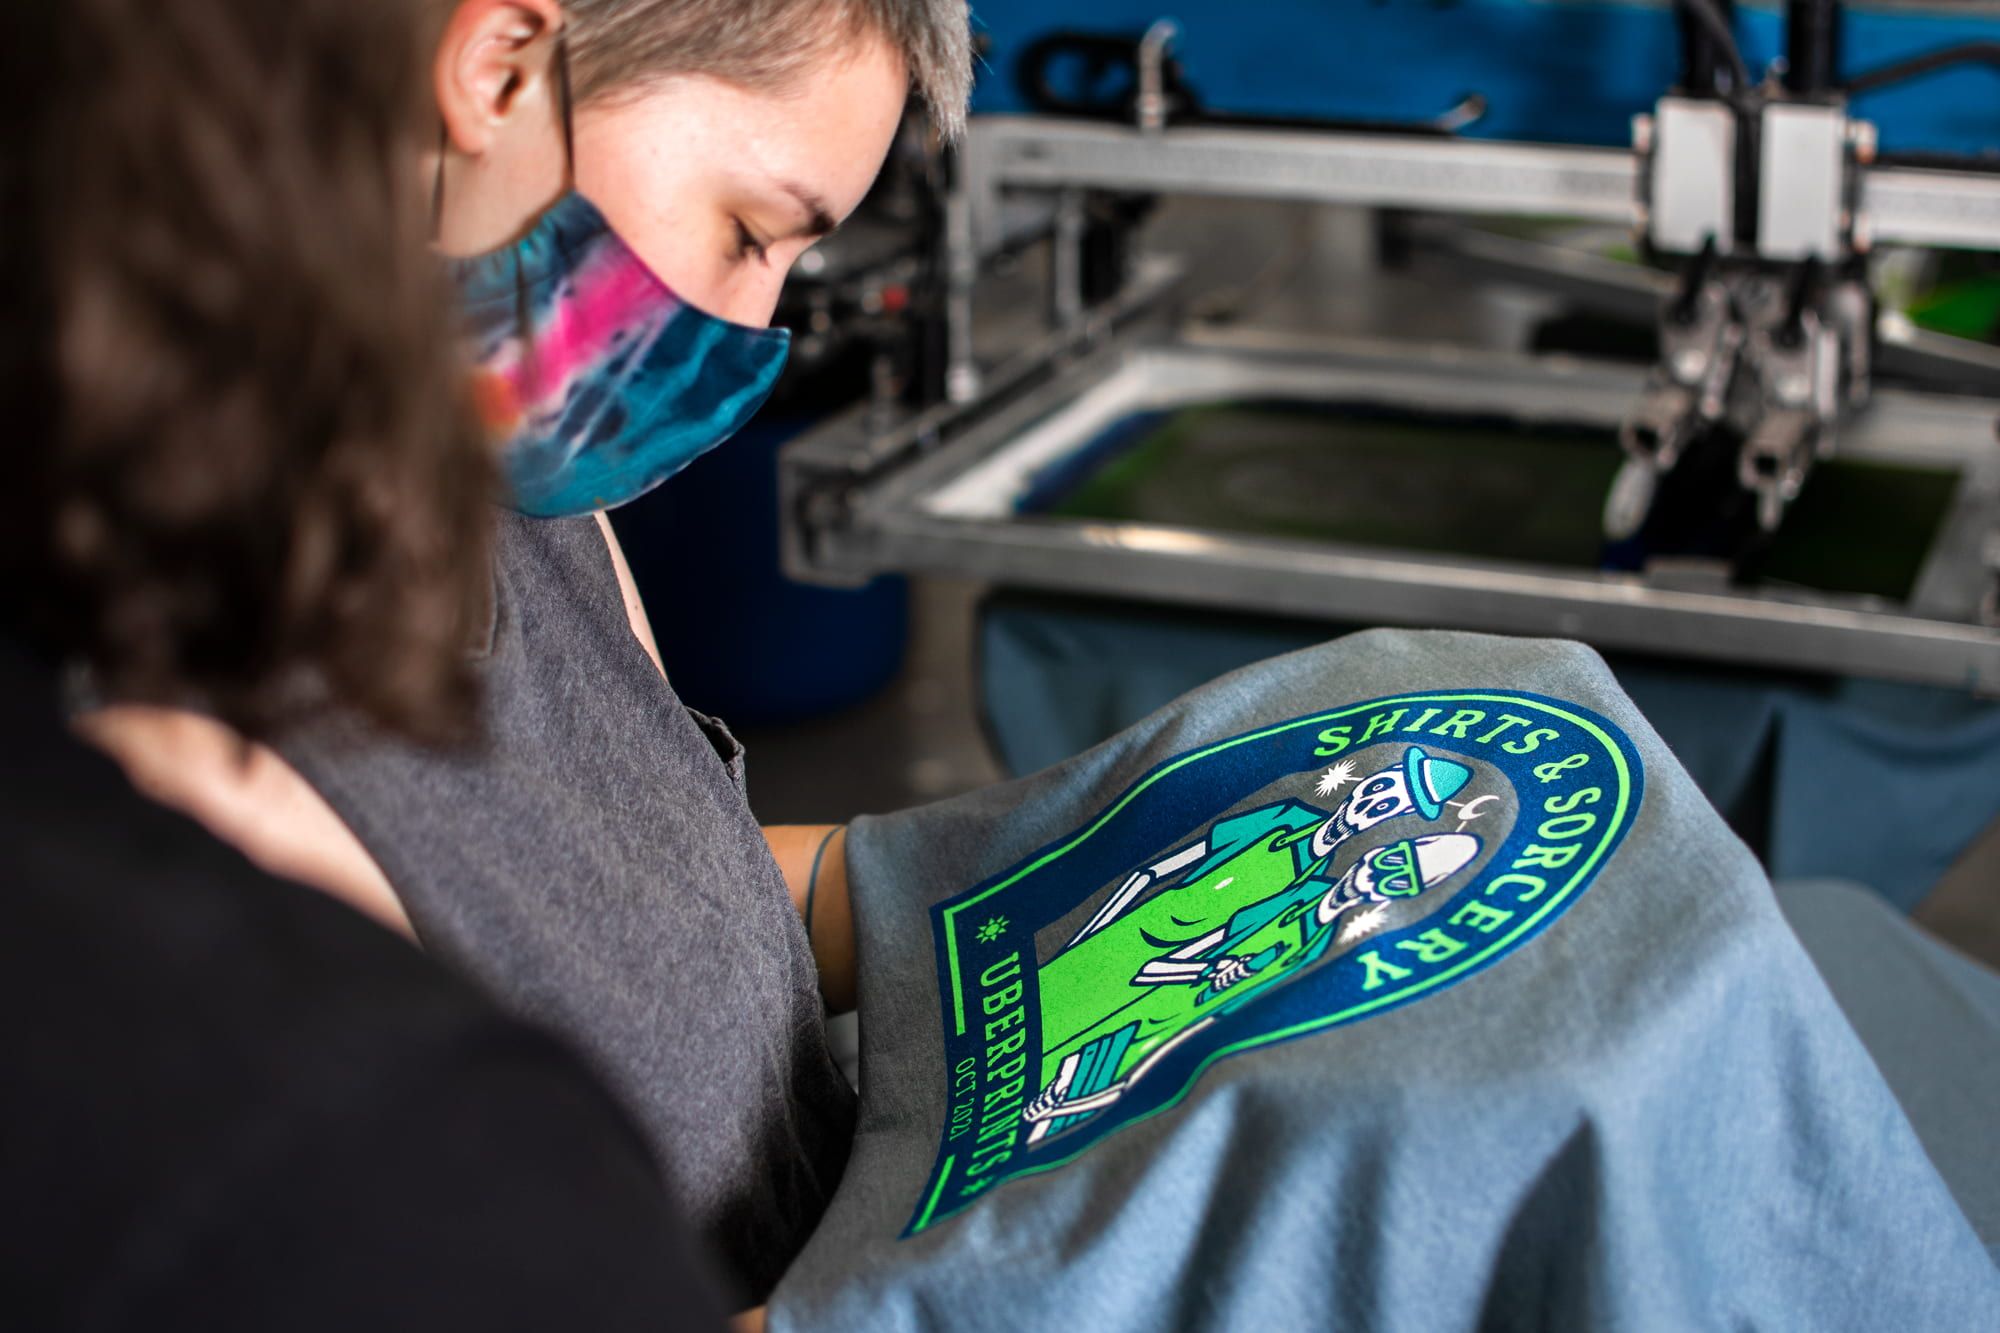 Quality assurance is everyone's job. Pictured are two UberPrints employees checking the Shirts & Sorcery shirt for any printing errors.